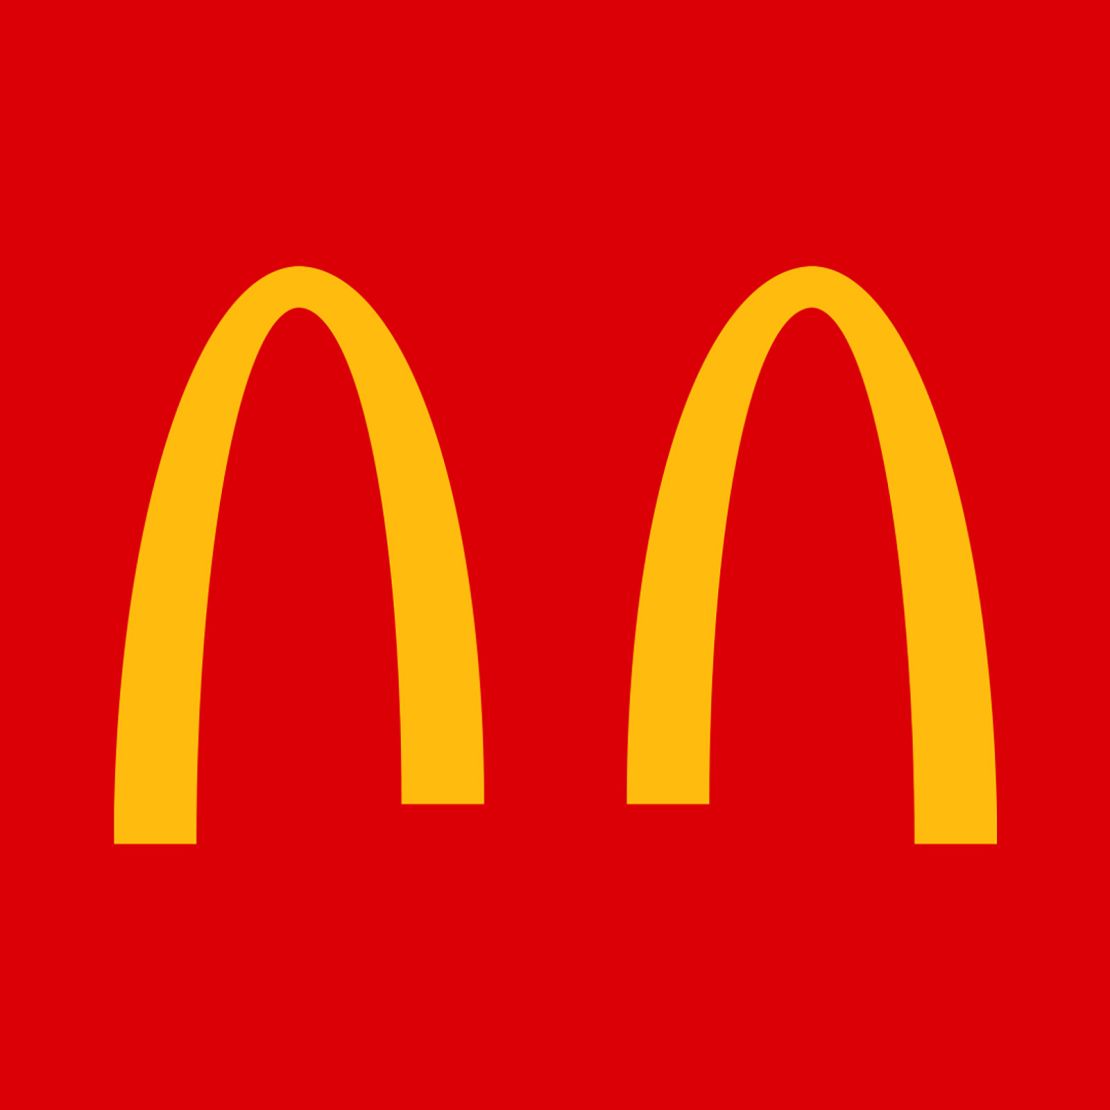 McDonald's Brazil separated the golden arches.